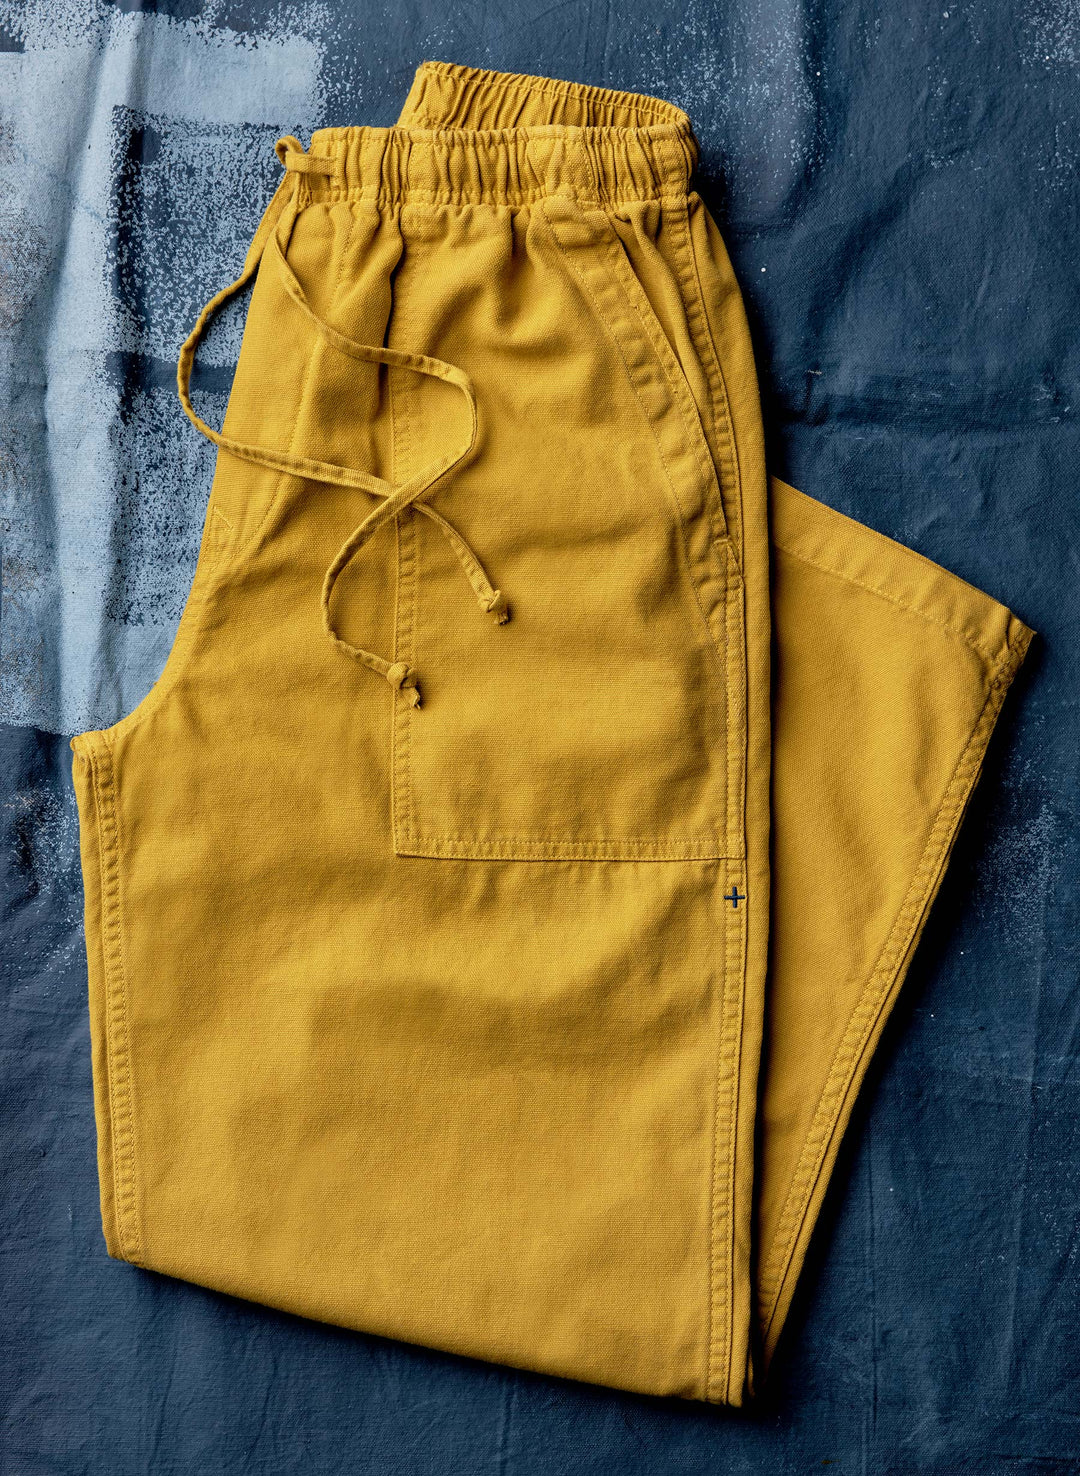 a pair of yellow pants